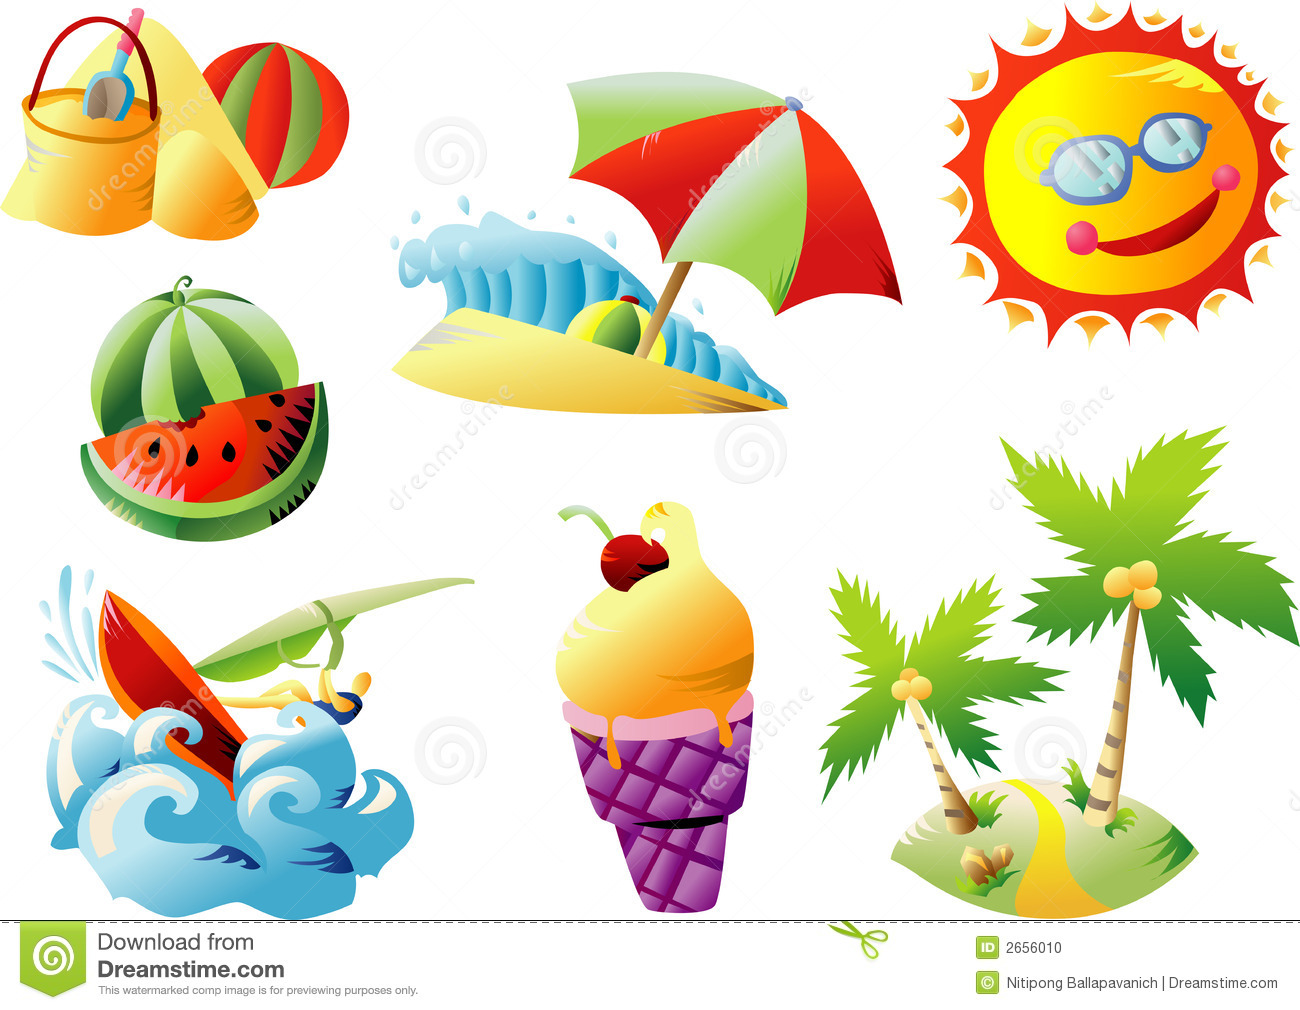 Clip art summer stock images image